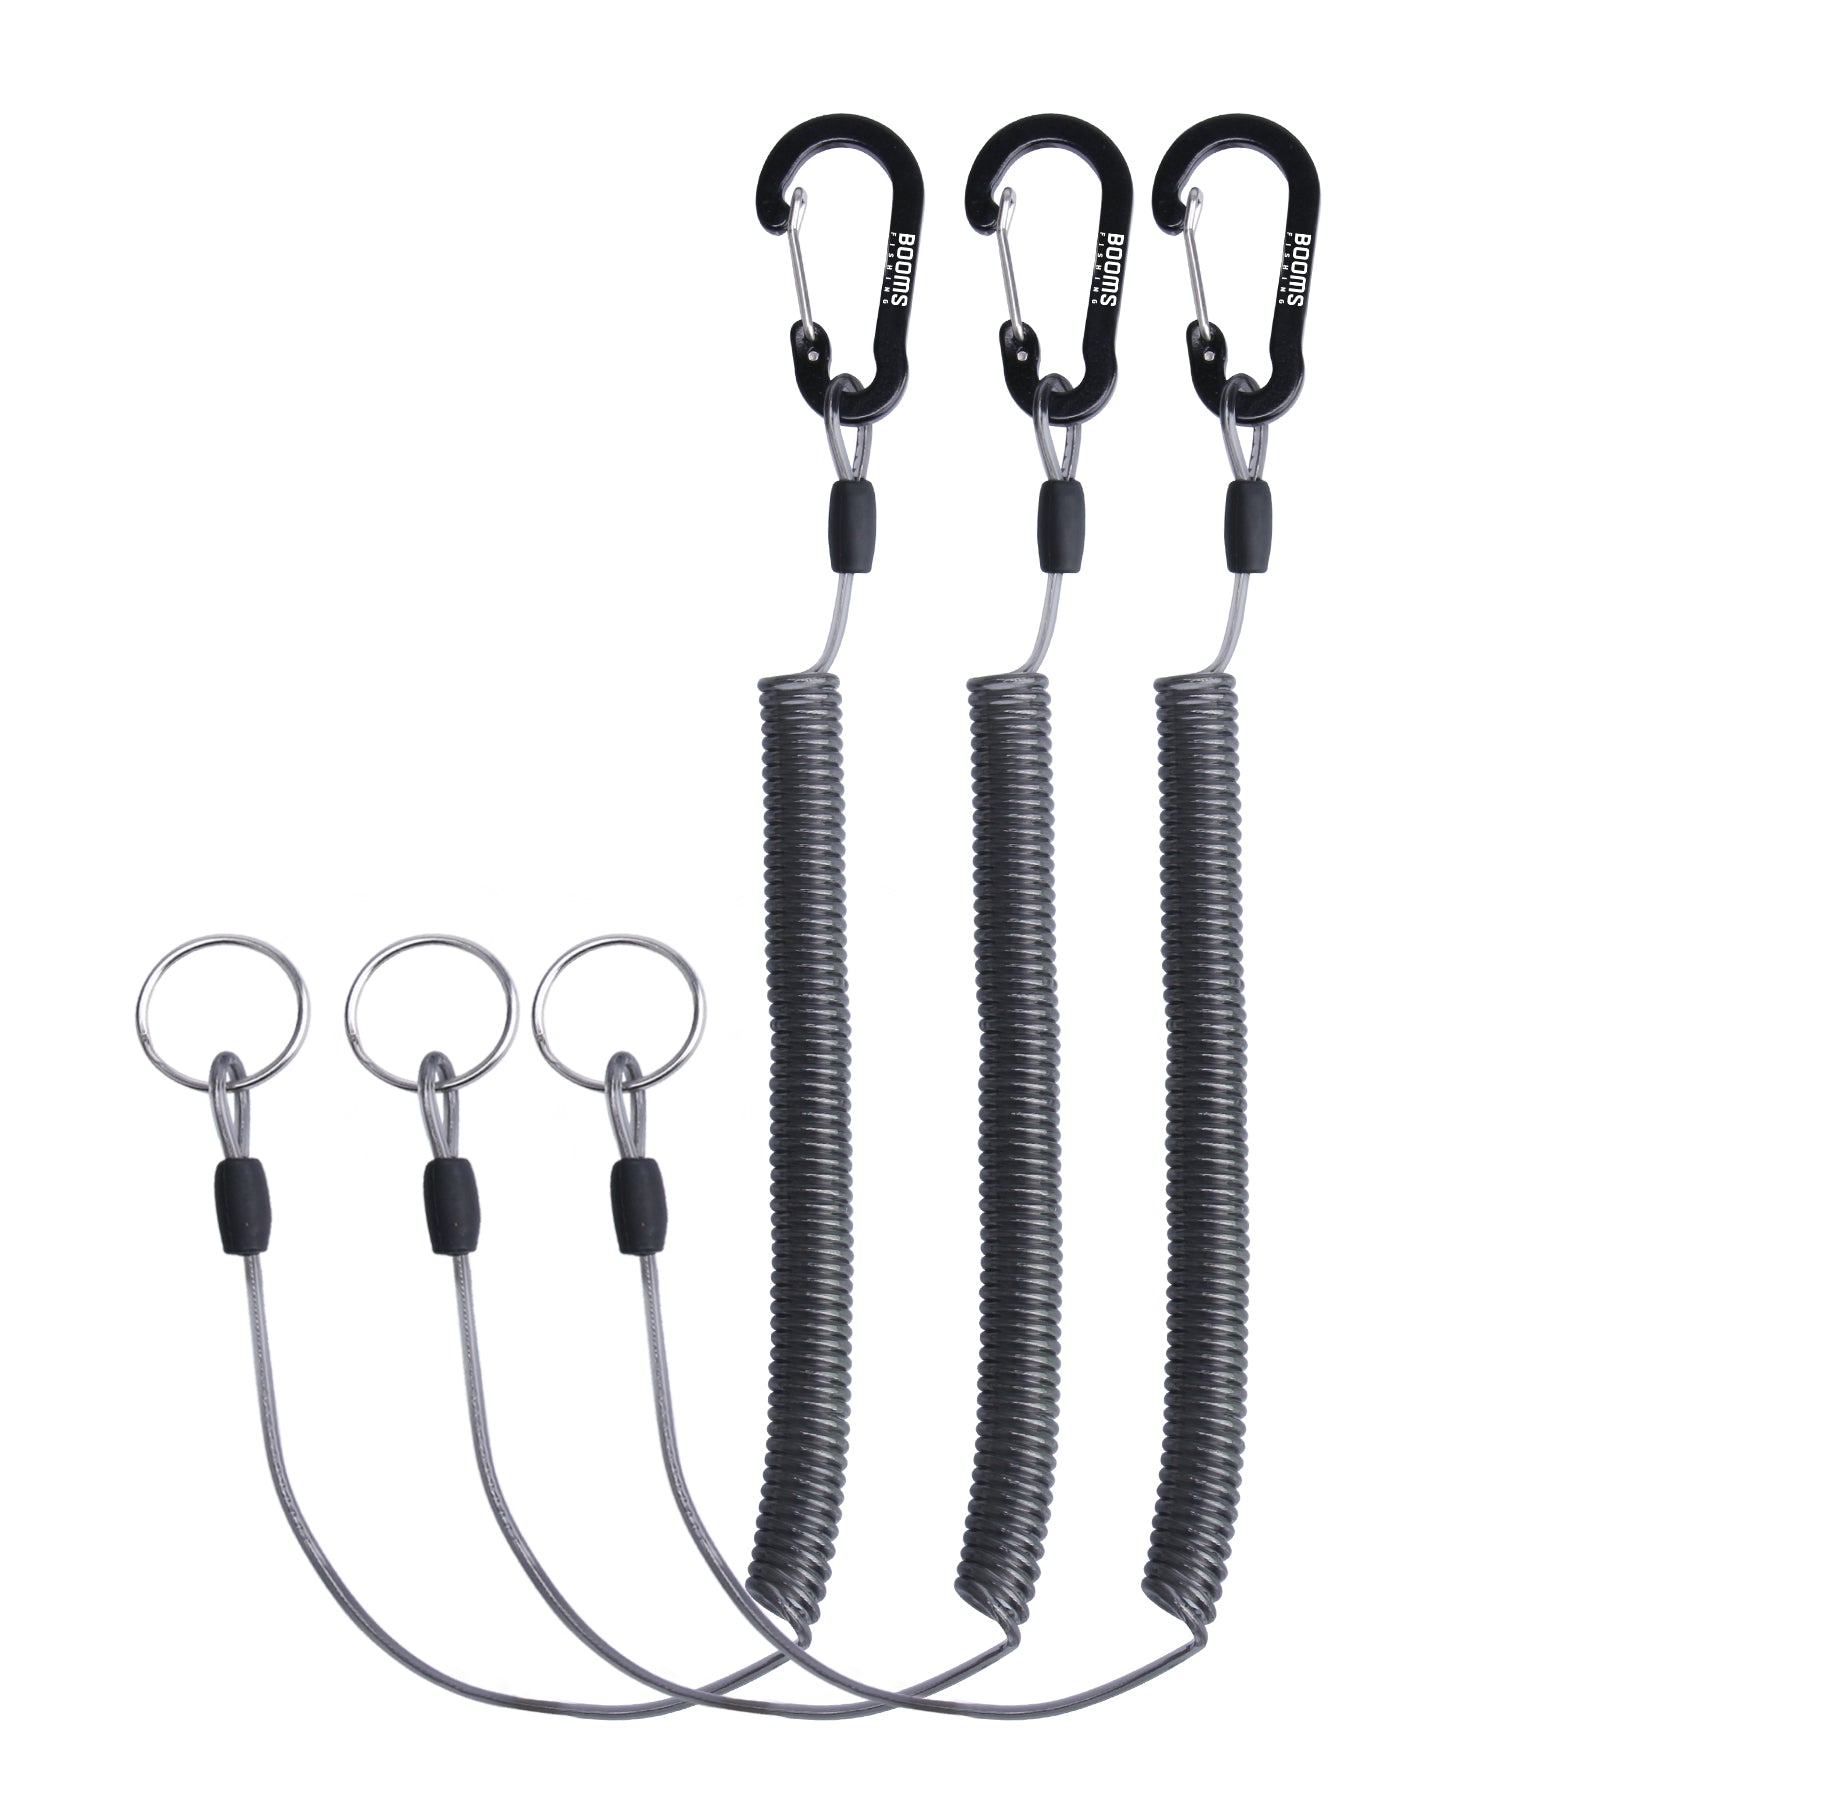 Booms Fishing T01 Coiled Lanyard 3 Pack 79 Retractable Fishing Lanyar –  Booms Fishing Official